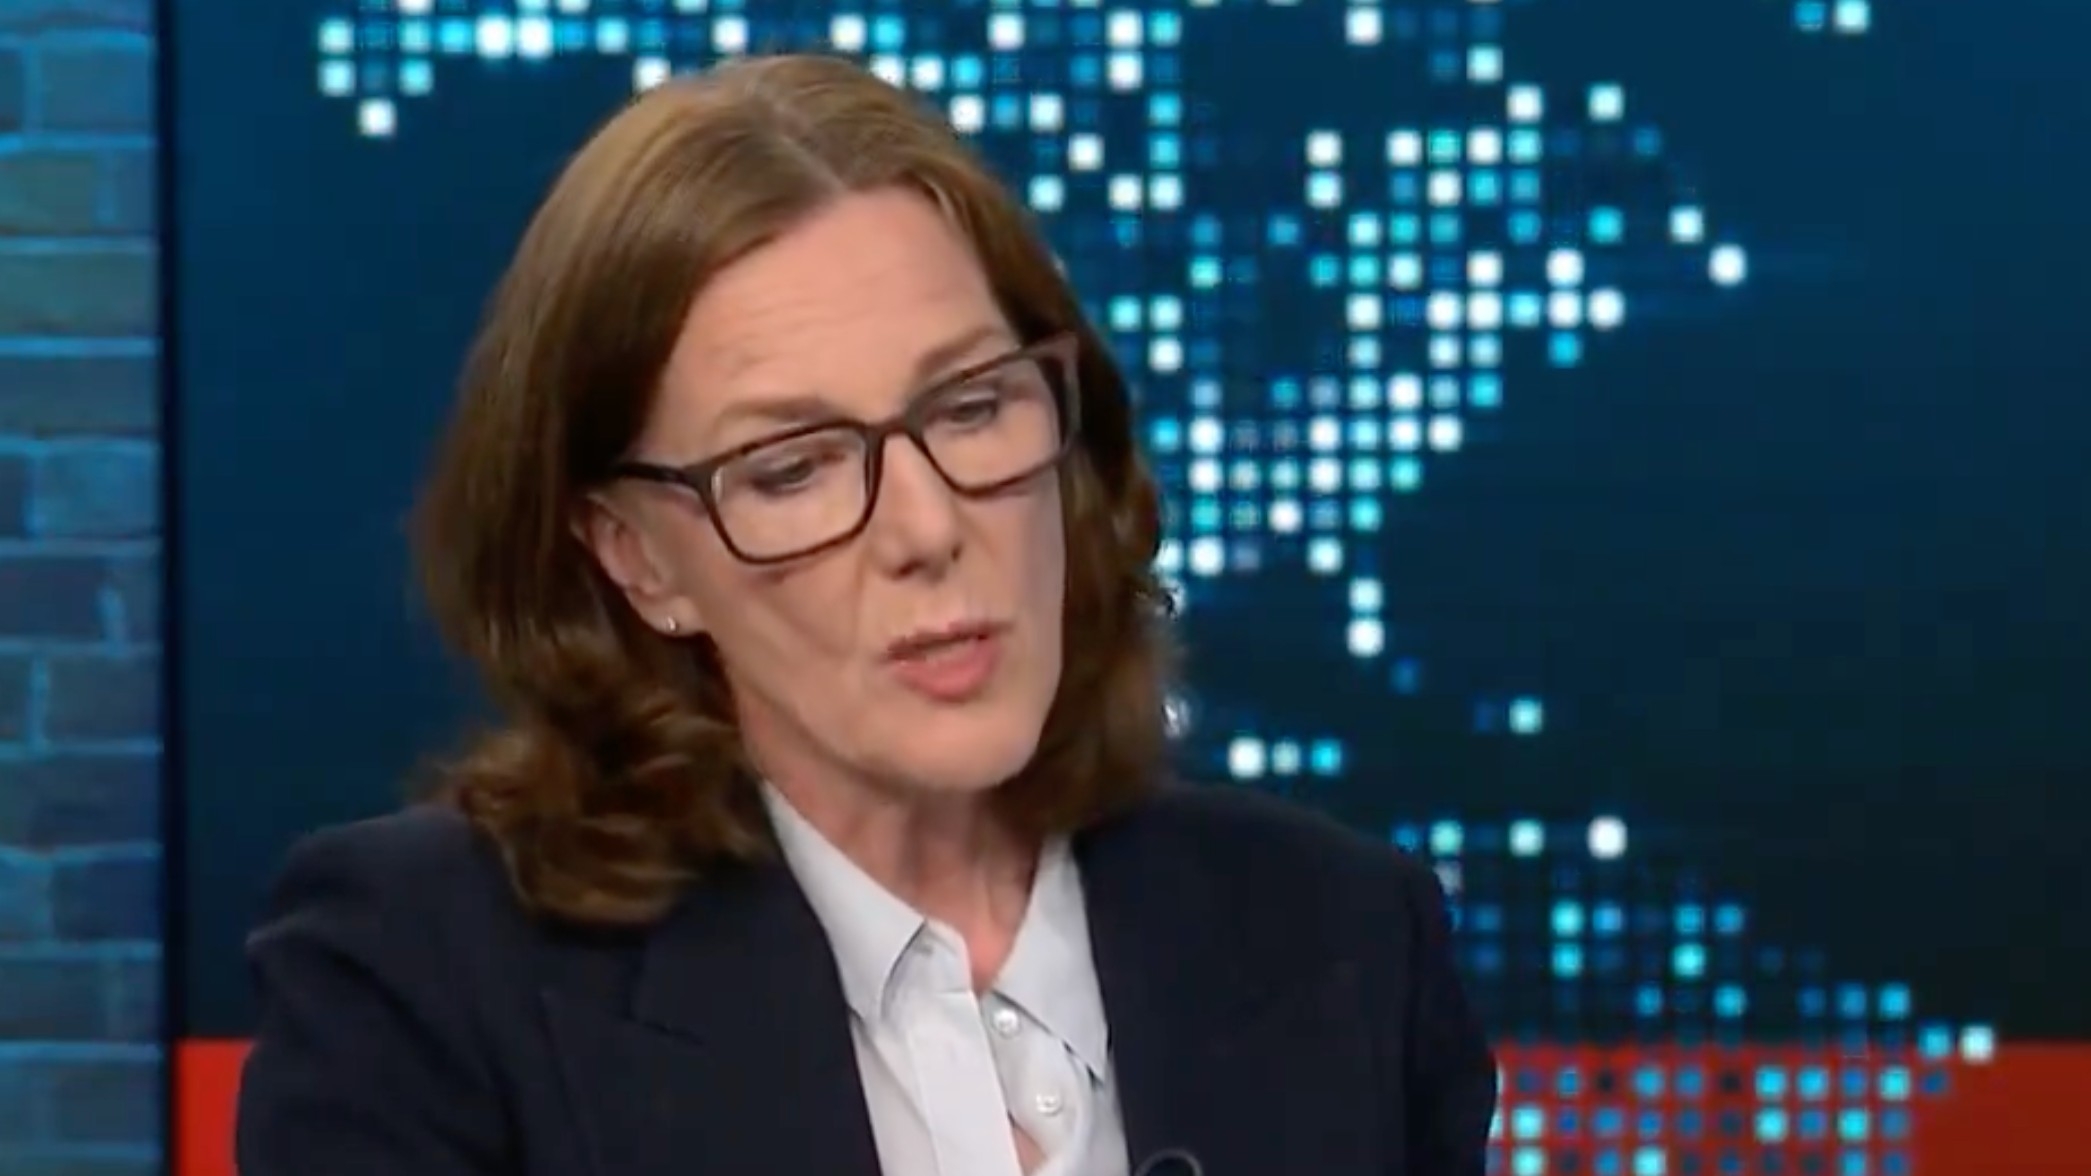 Dr Deborah Harrington speaks about her experience in Gaza in an interview with CNN (Screengrab)